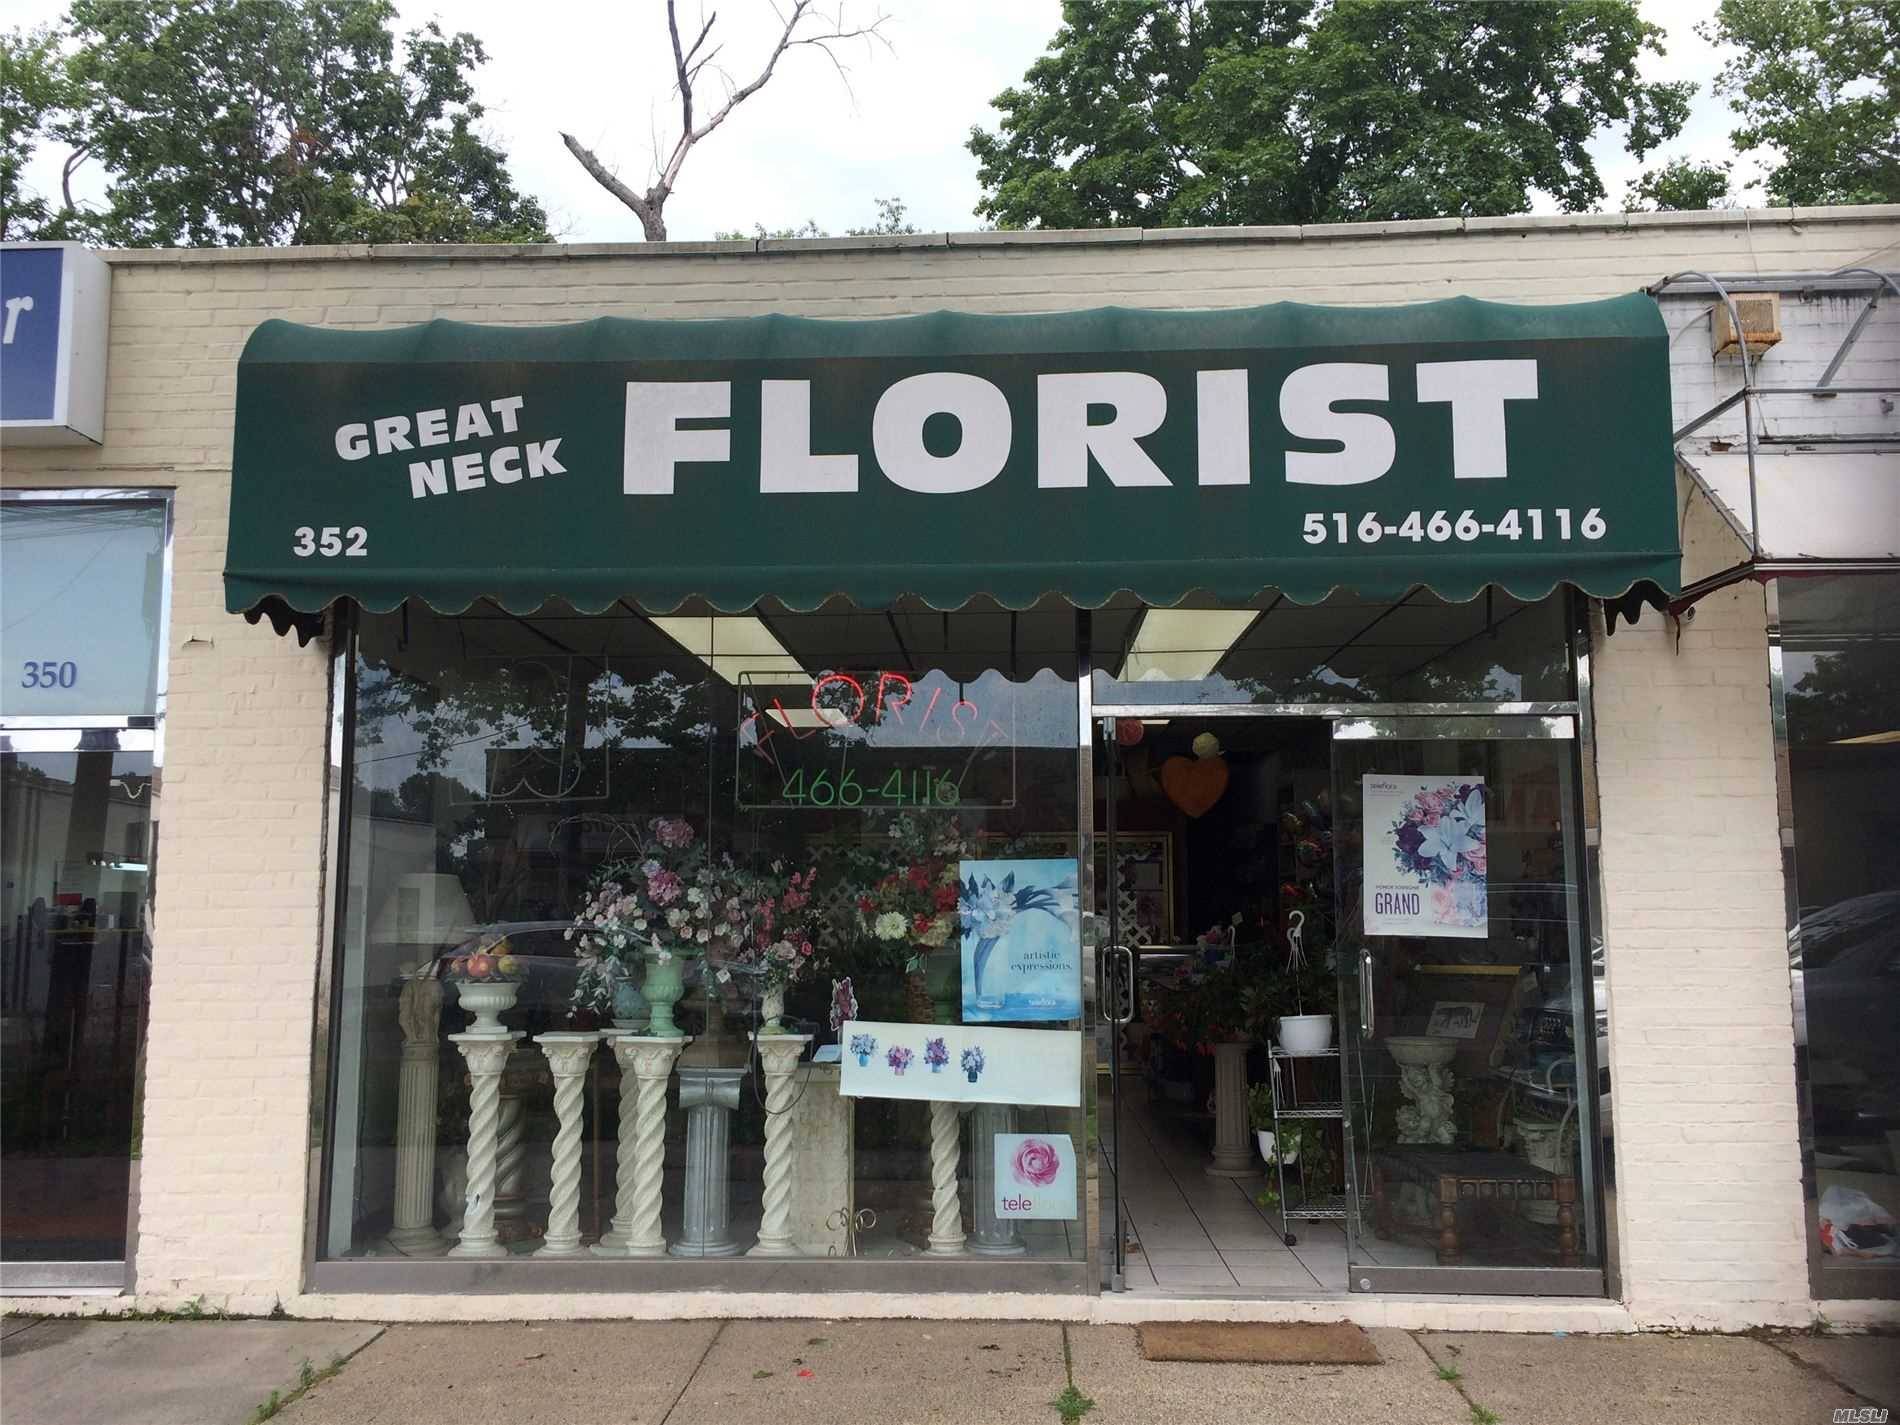 Amazing Income Property Opportunity to Own 3 Fully Leased out Stores in Excellent Location on Great Neck Road Conveniently Close to Restaurants and Northern Blvd.